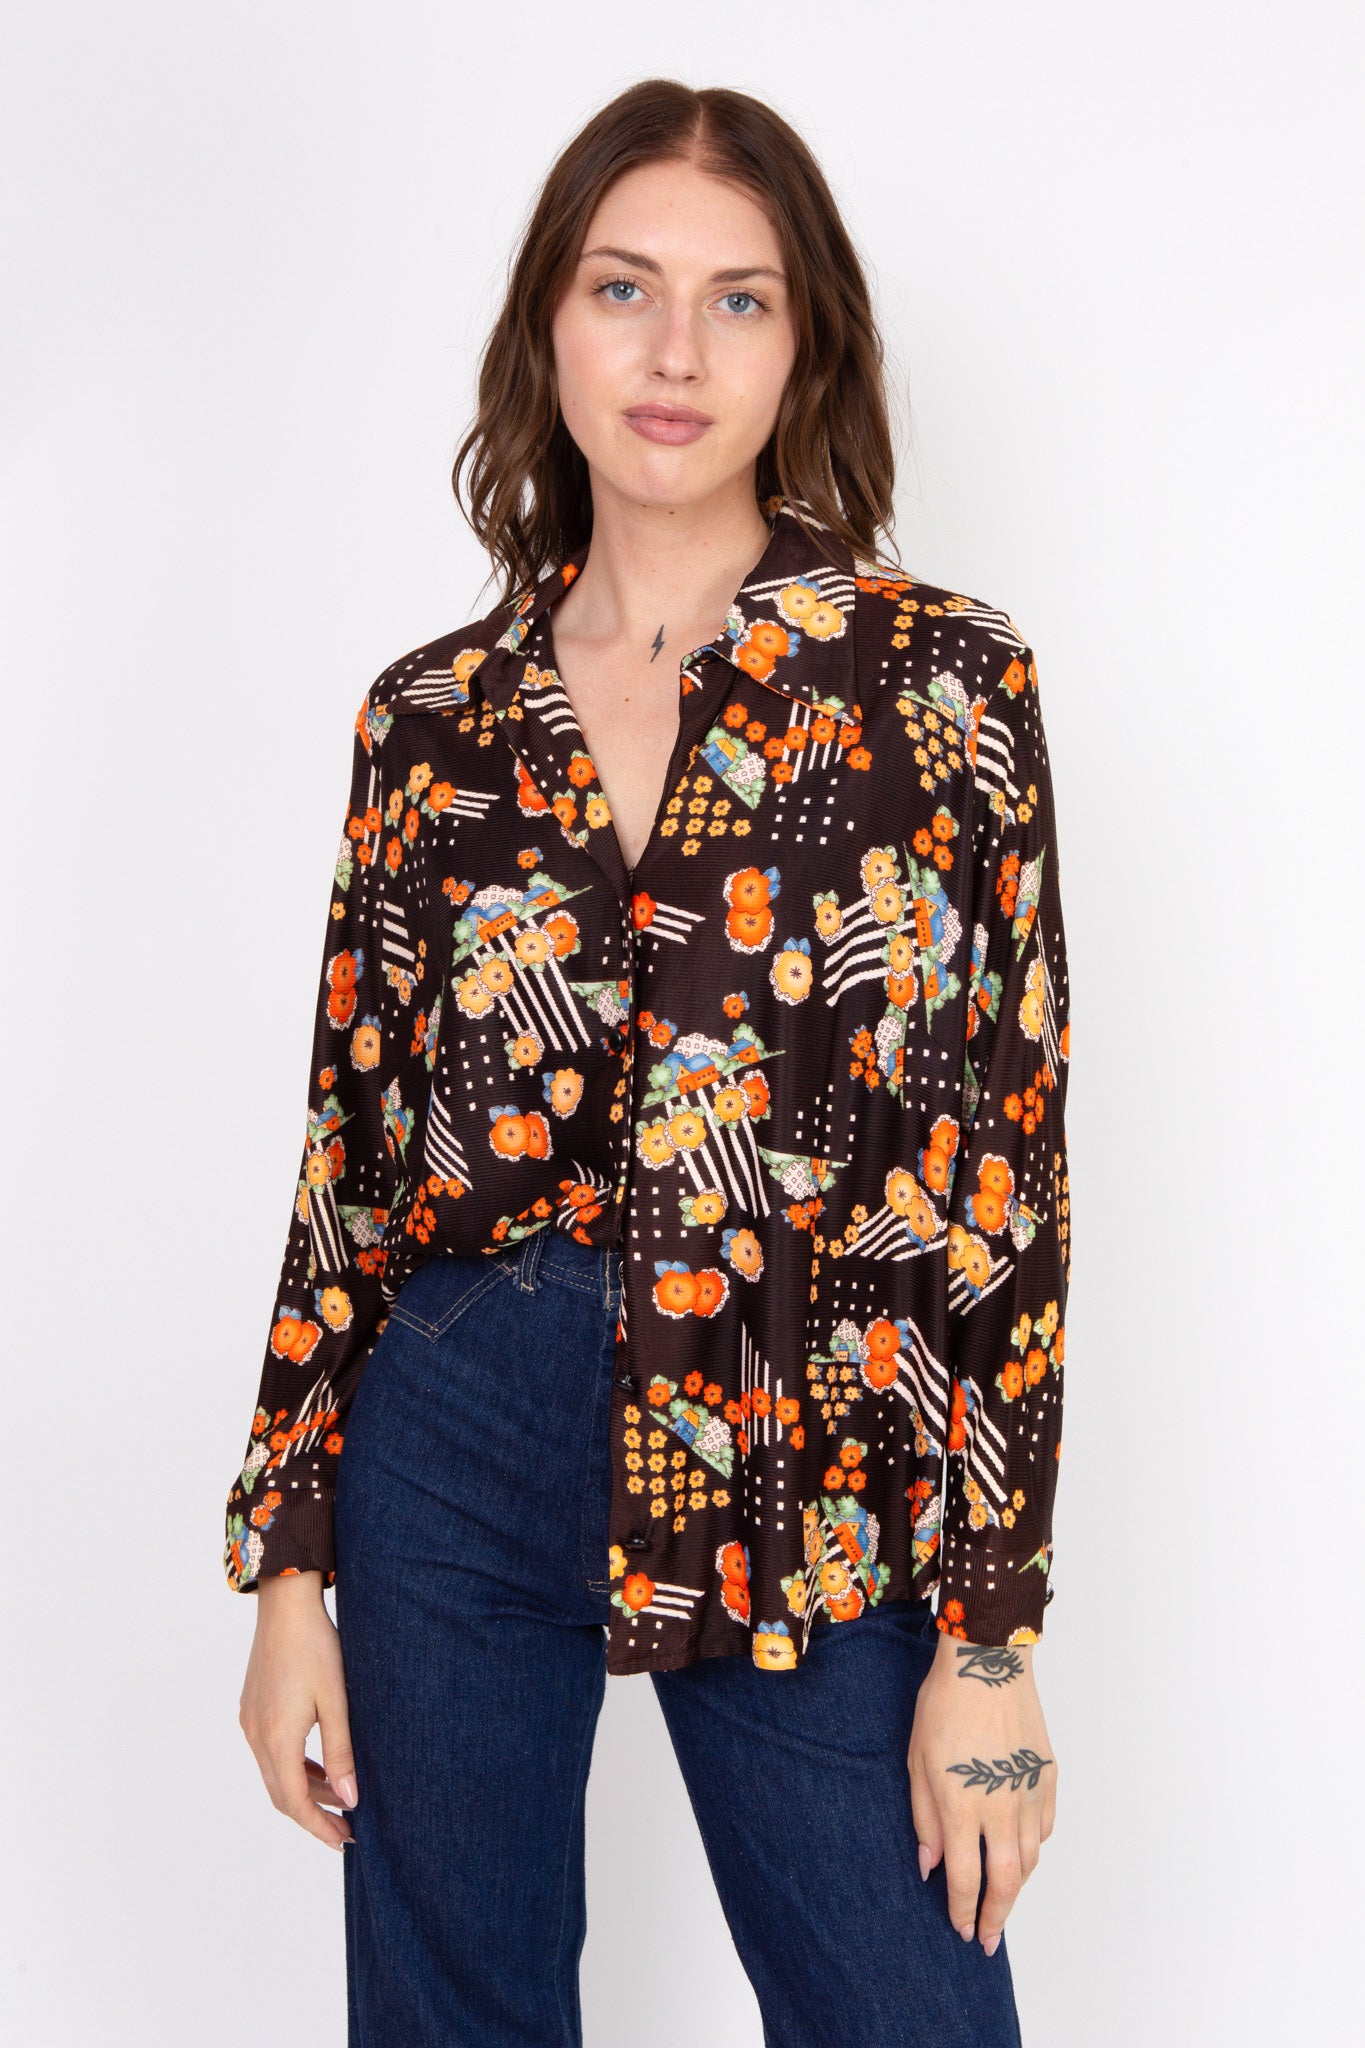 Our House Blouse